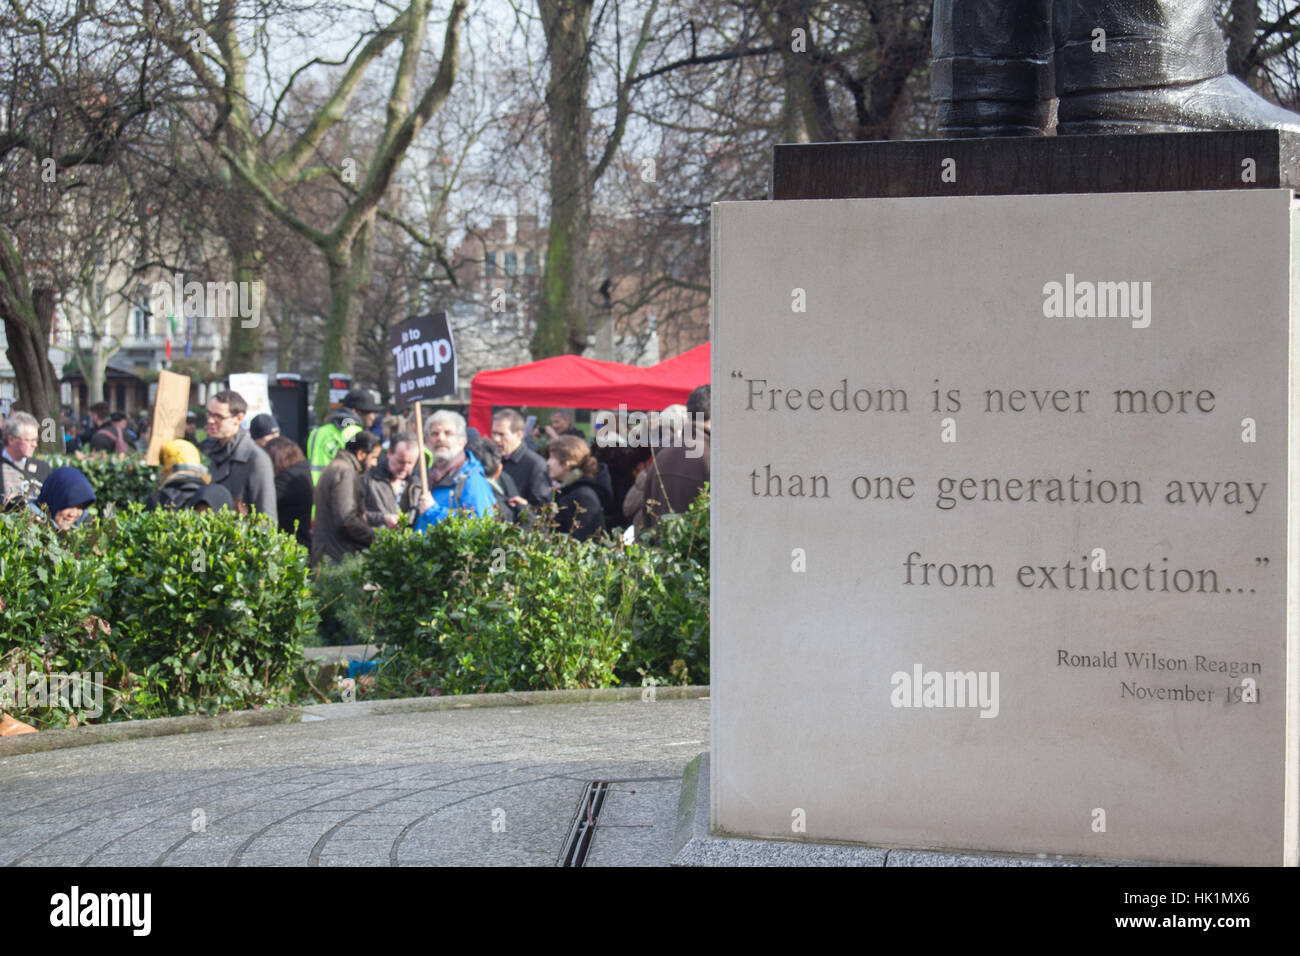 London, UK. 4th February, 2017. Regan statue and quote on Freedom at 4th Feb 2017 London March against Donald Trump Credit: Pauline A Yates/Alamy Live News Stock Photo